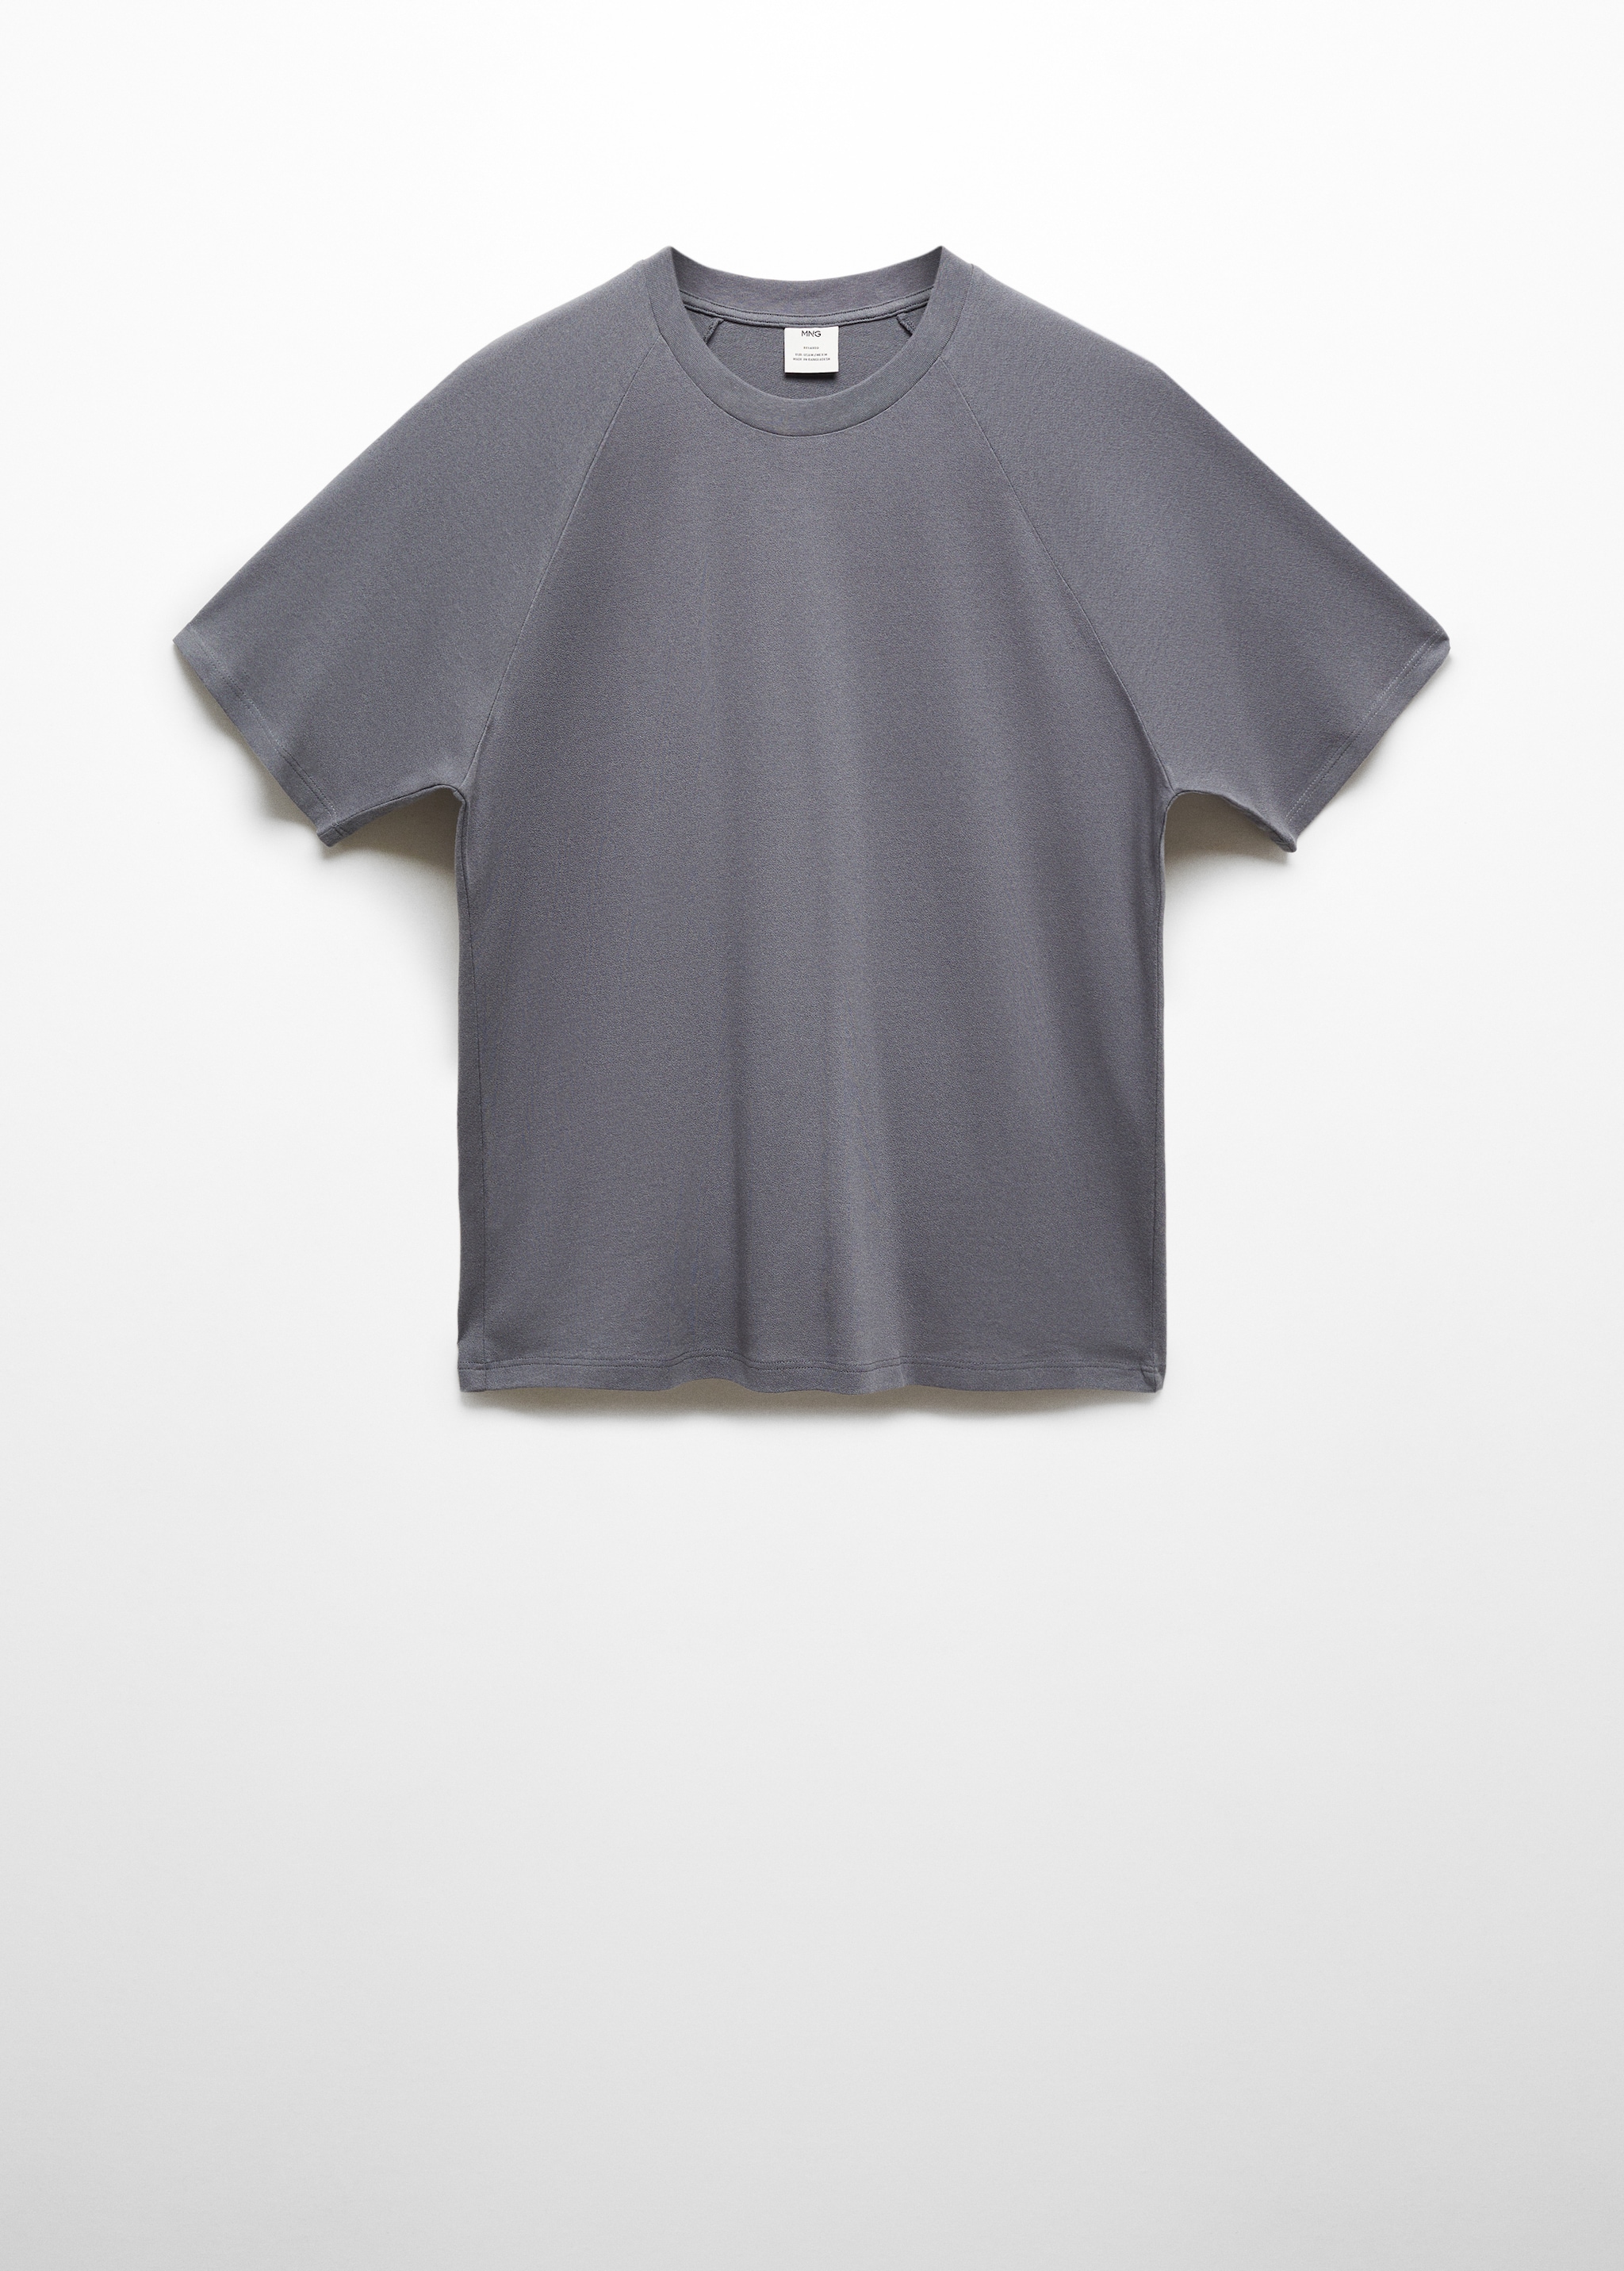 Relaxed fit cotton t-shirt - Article without model